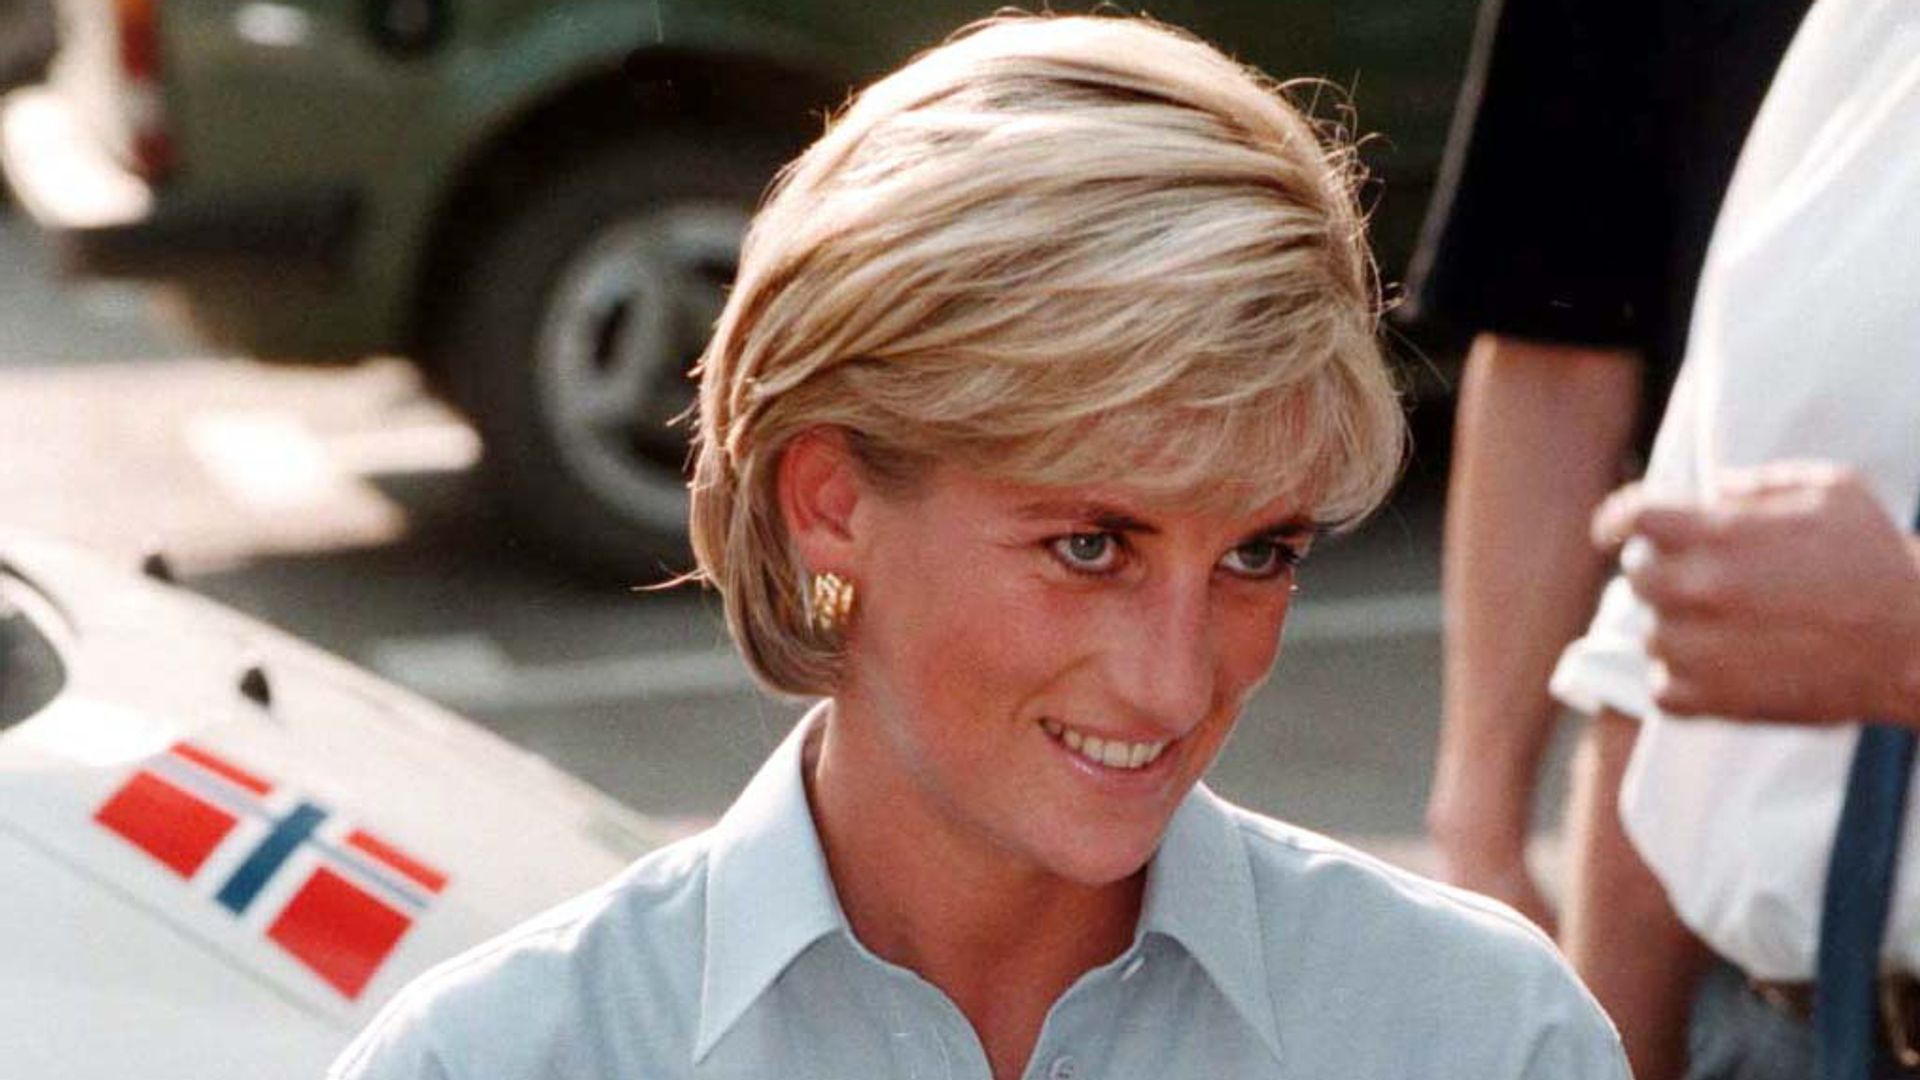 Princess Charlotte is Princess Diana's double in touching childhood photo with Charles Spencer